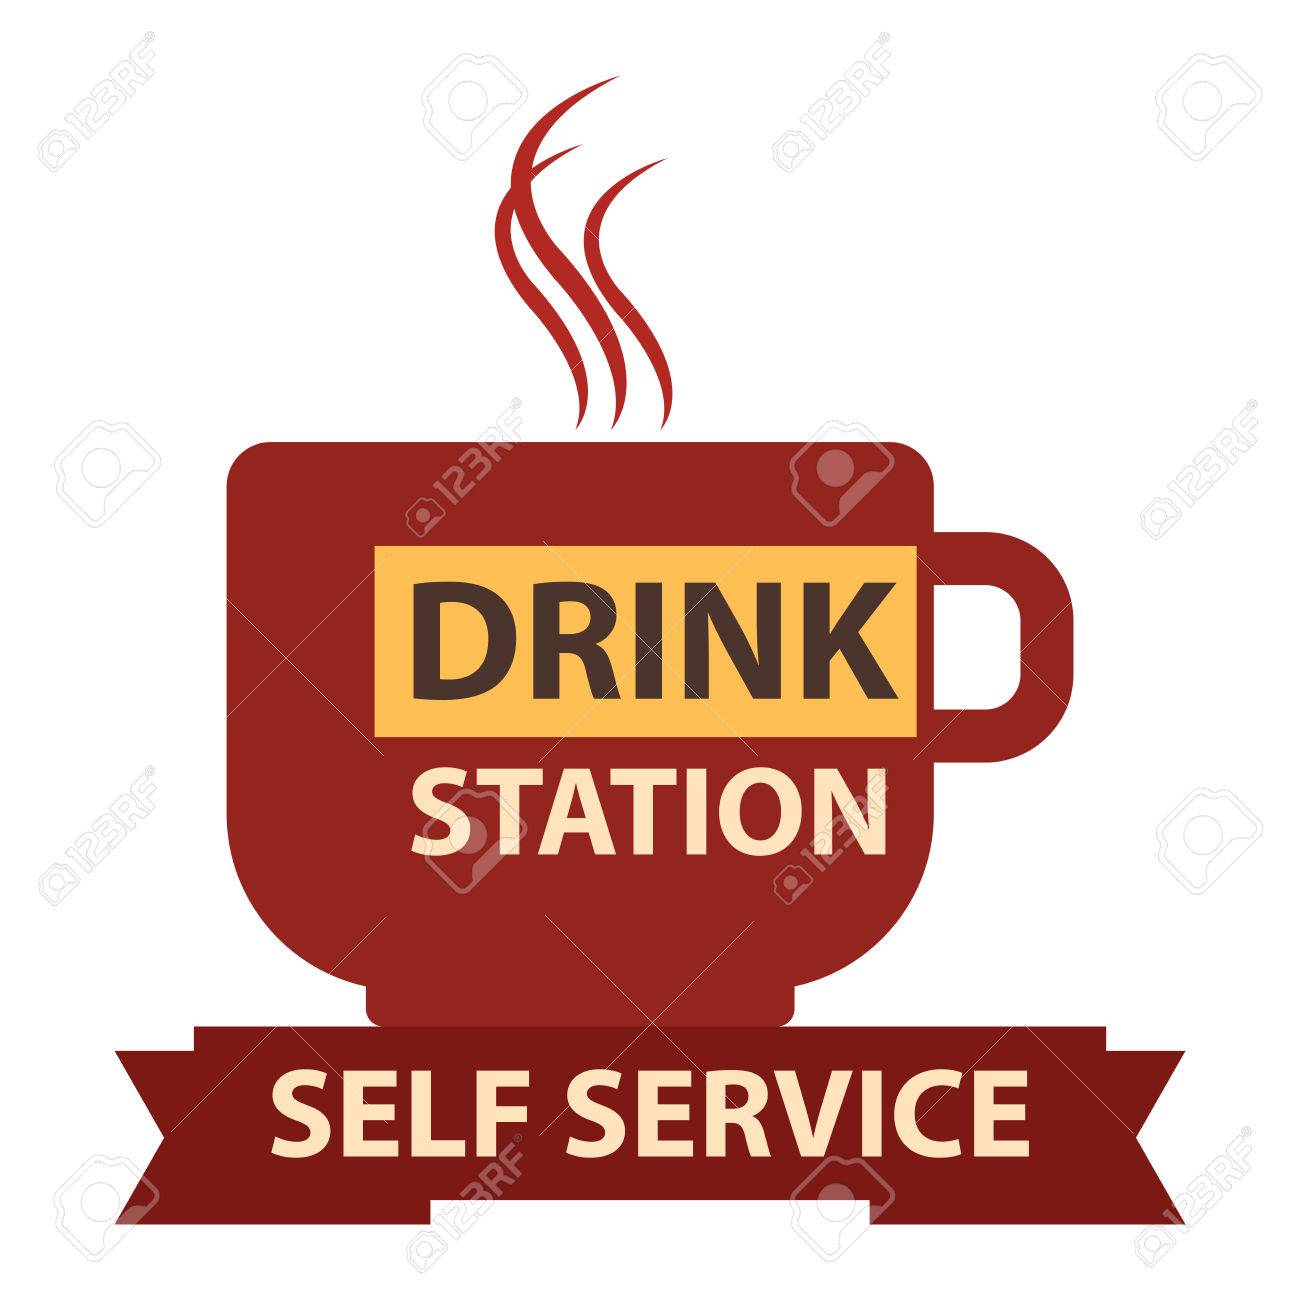 Self-service pictogram and signs Stock image and royalty-free 